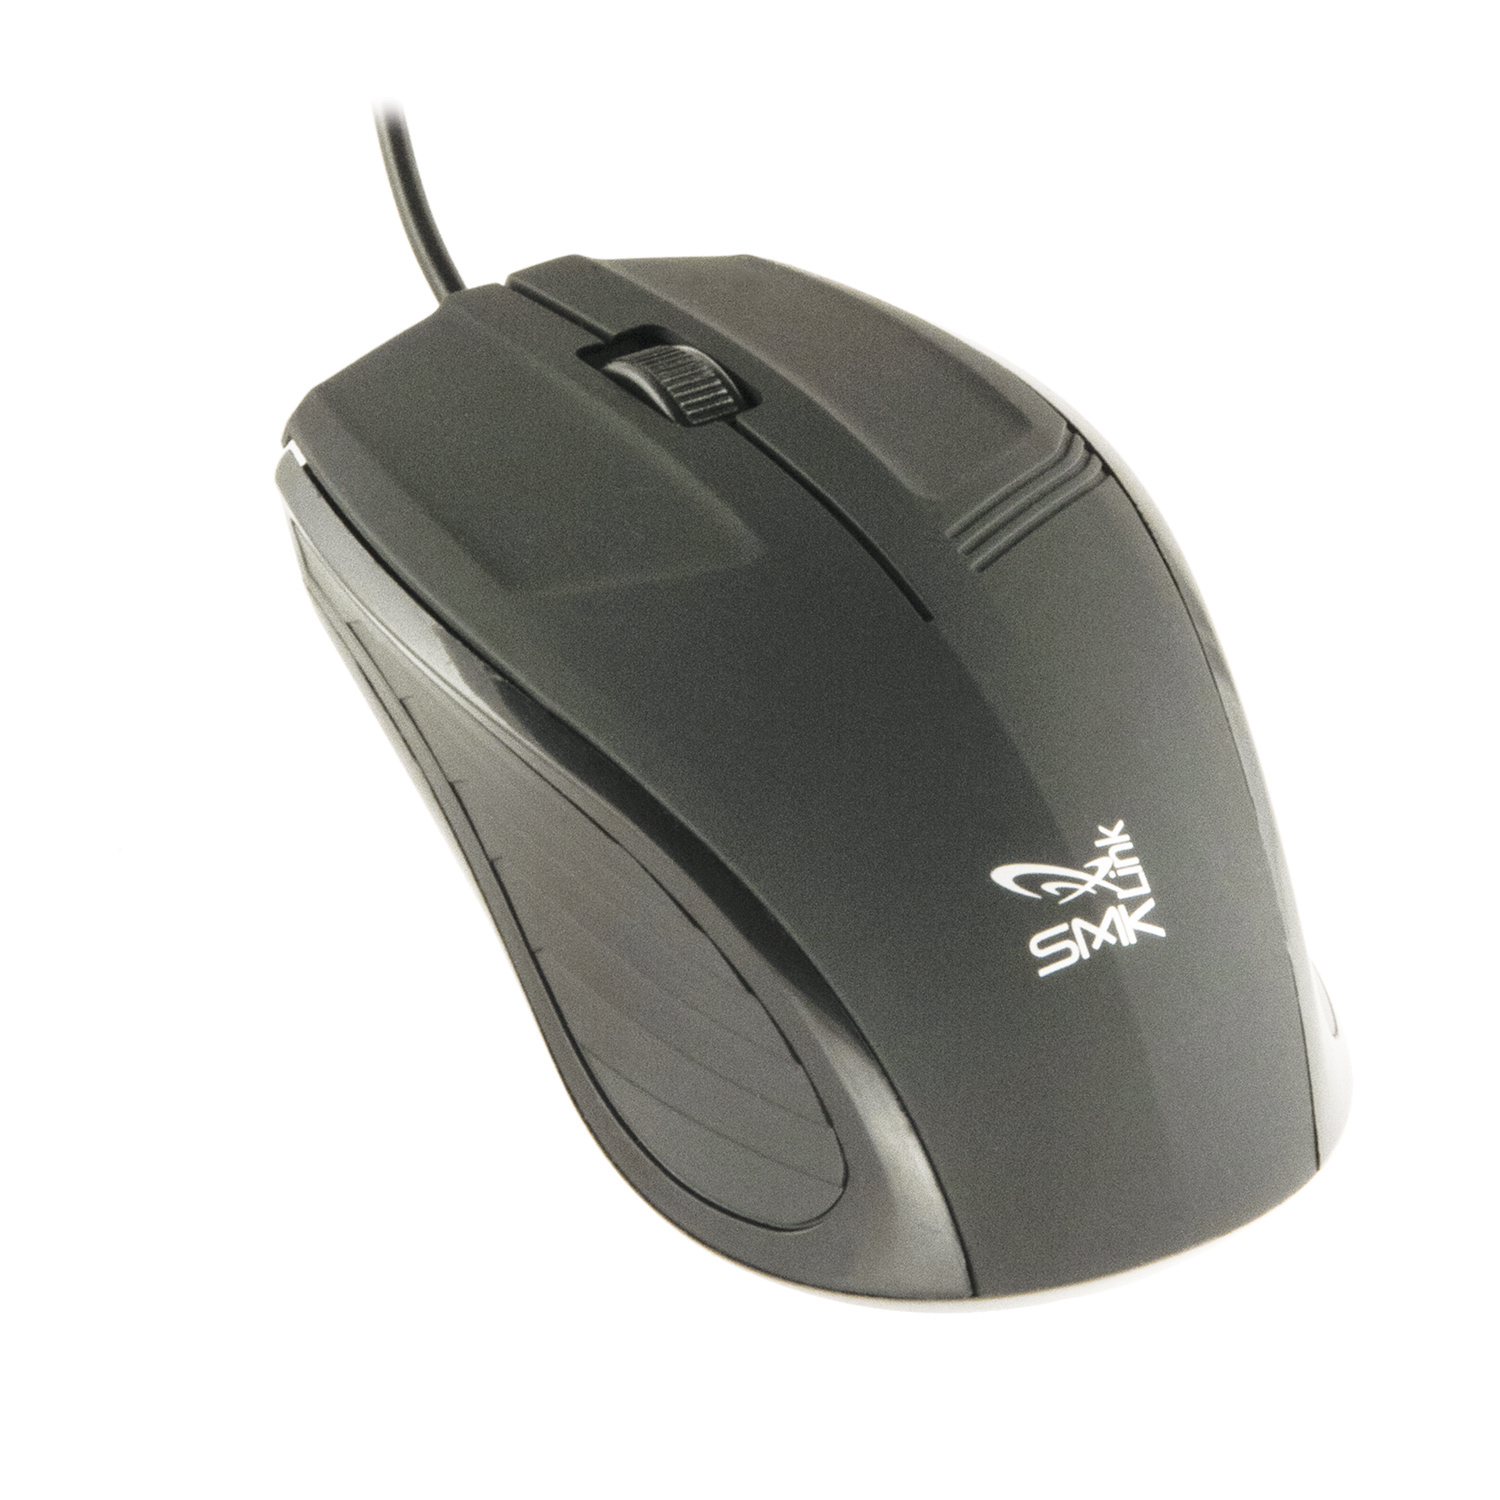 TAA-Compliant Wired USB Keyboard Mouse